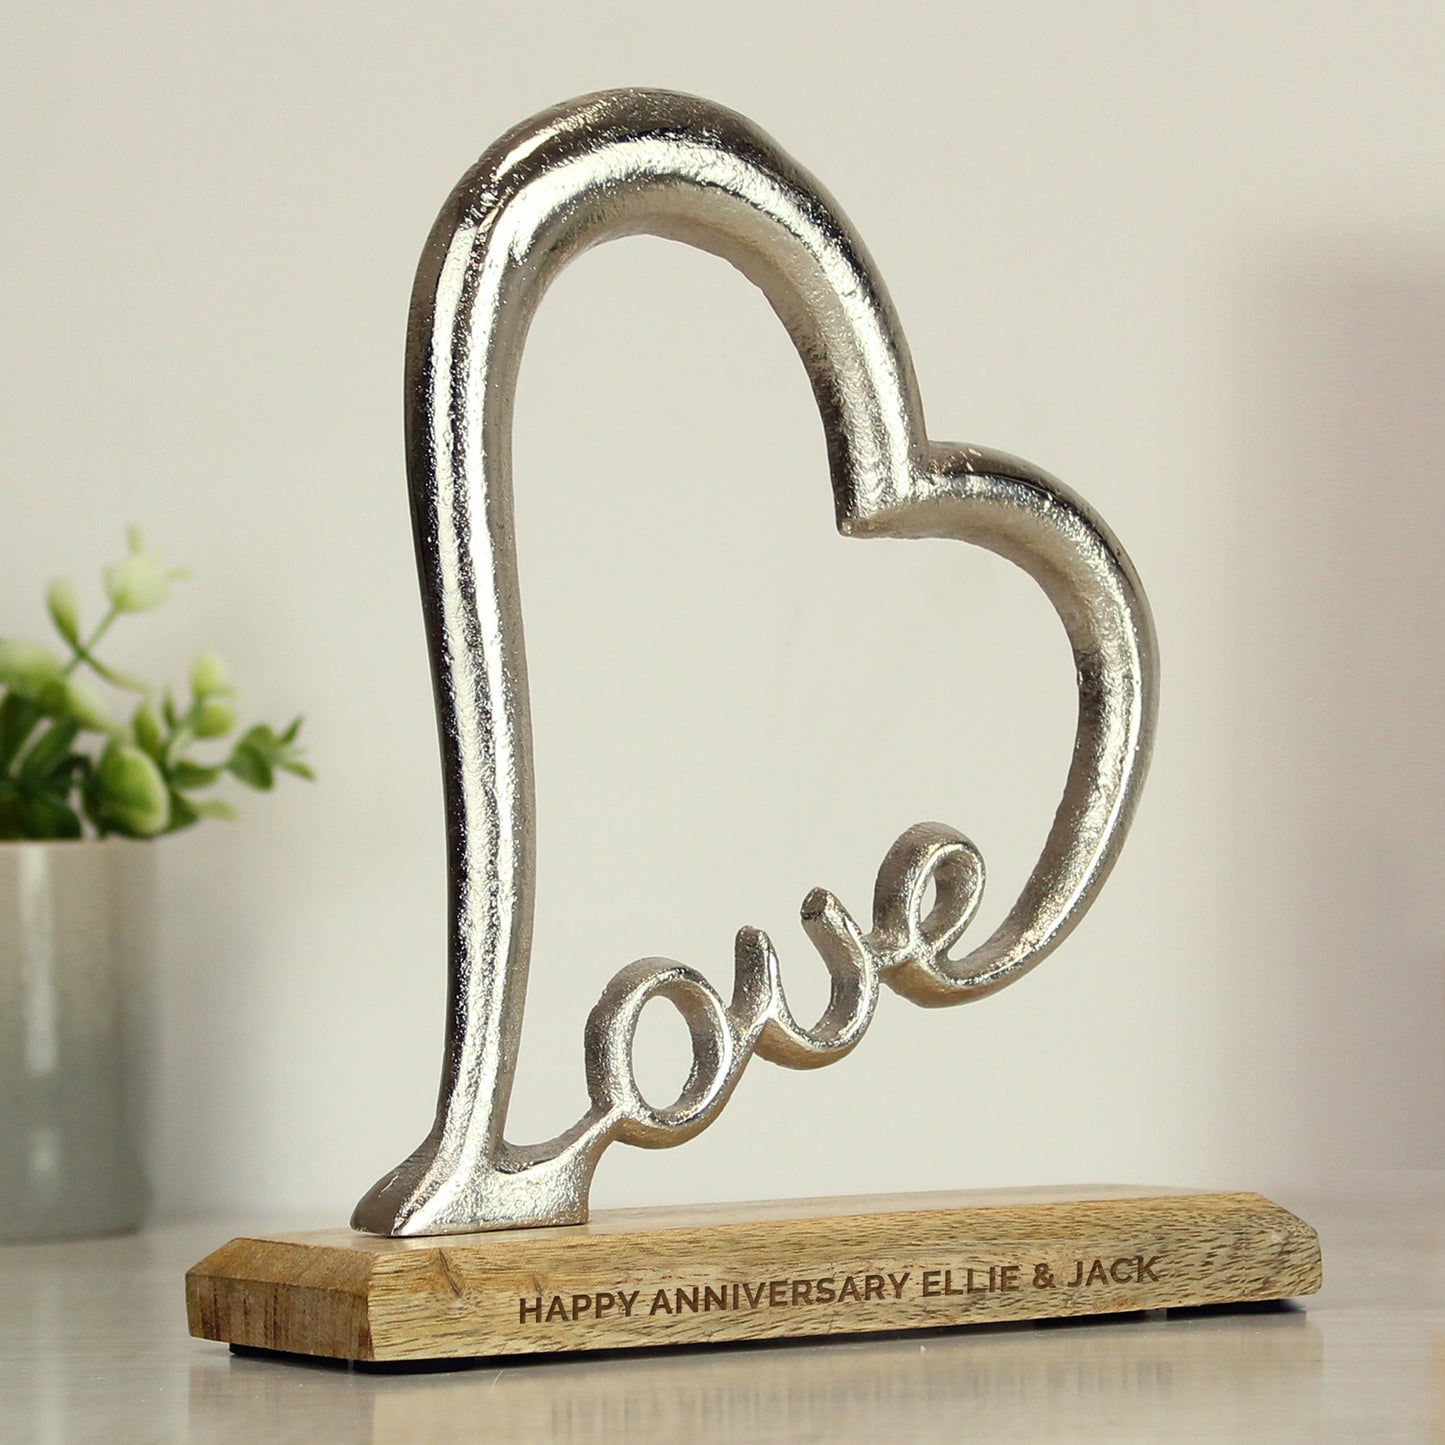 Personalised Love Heart Ornament - Free Delivery 